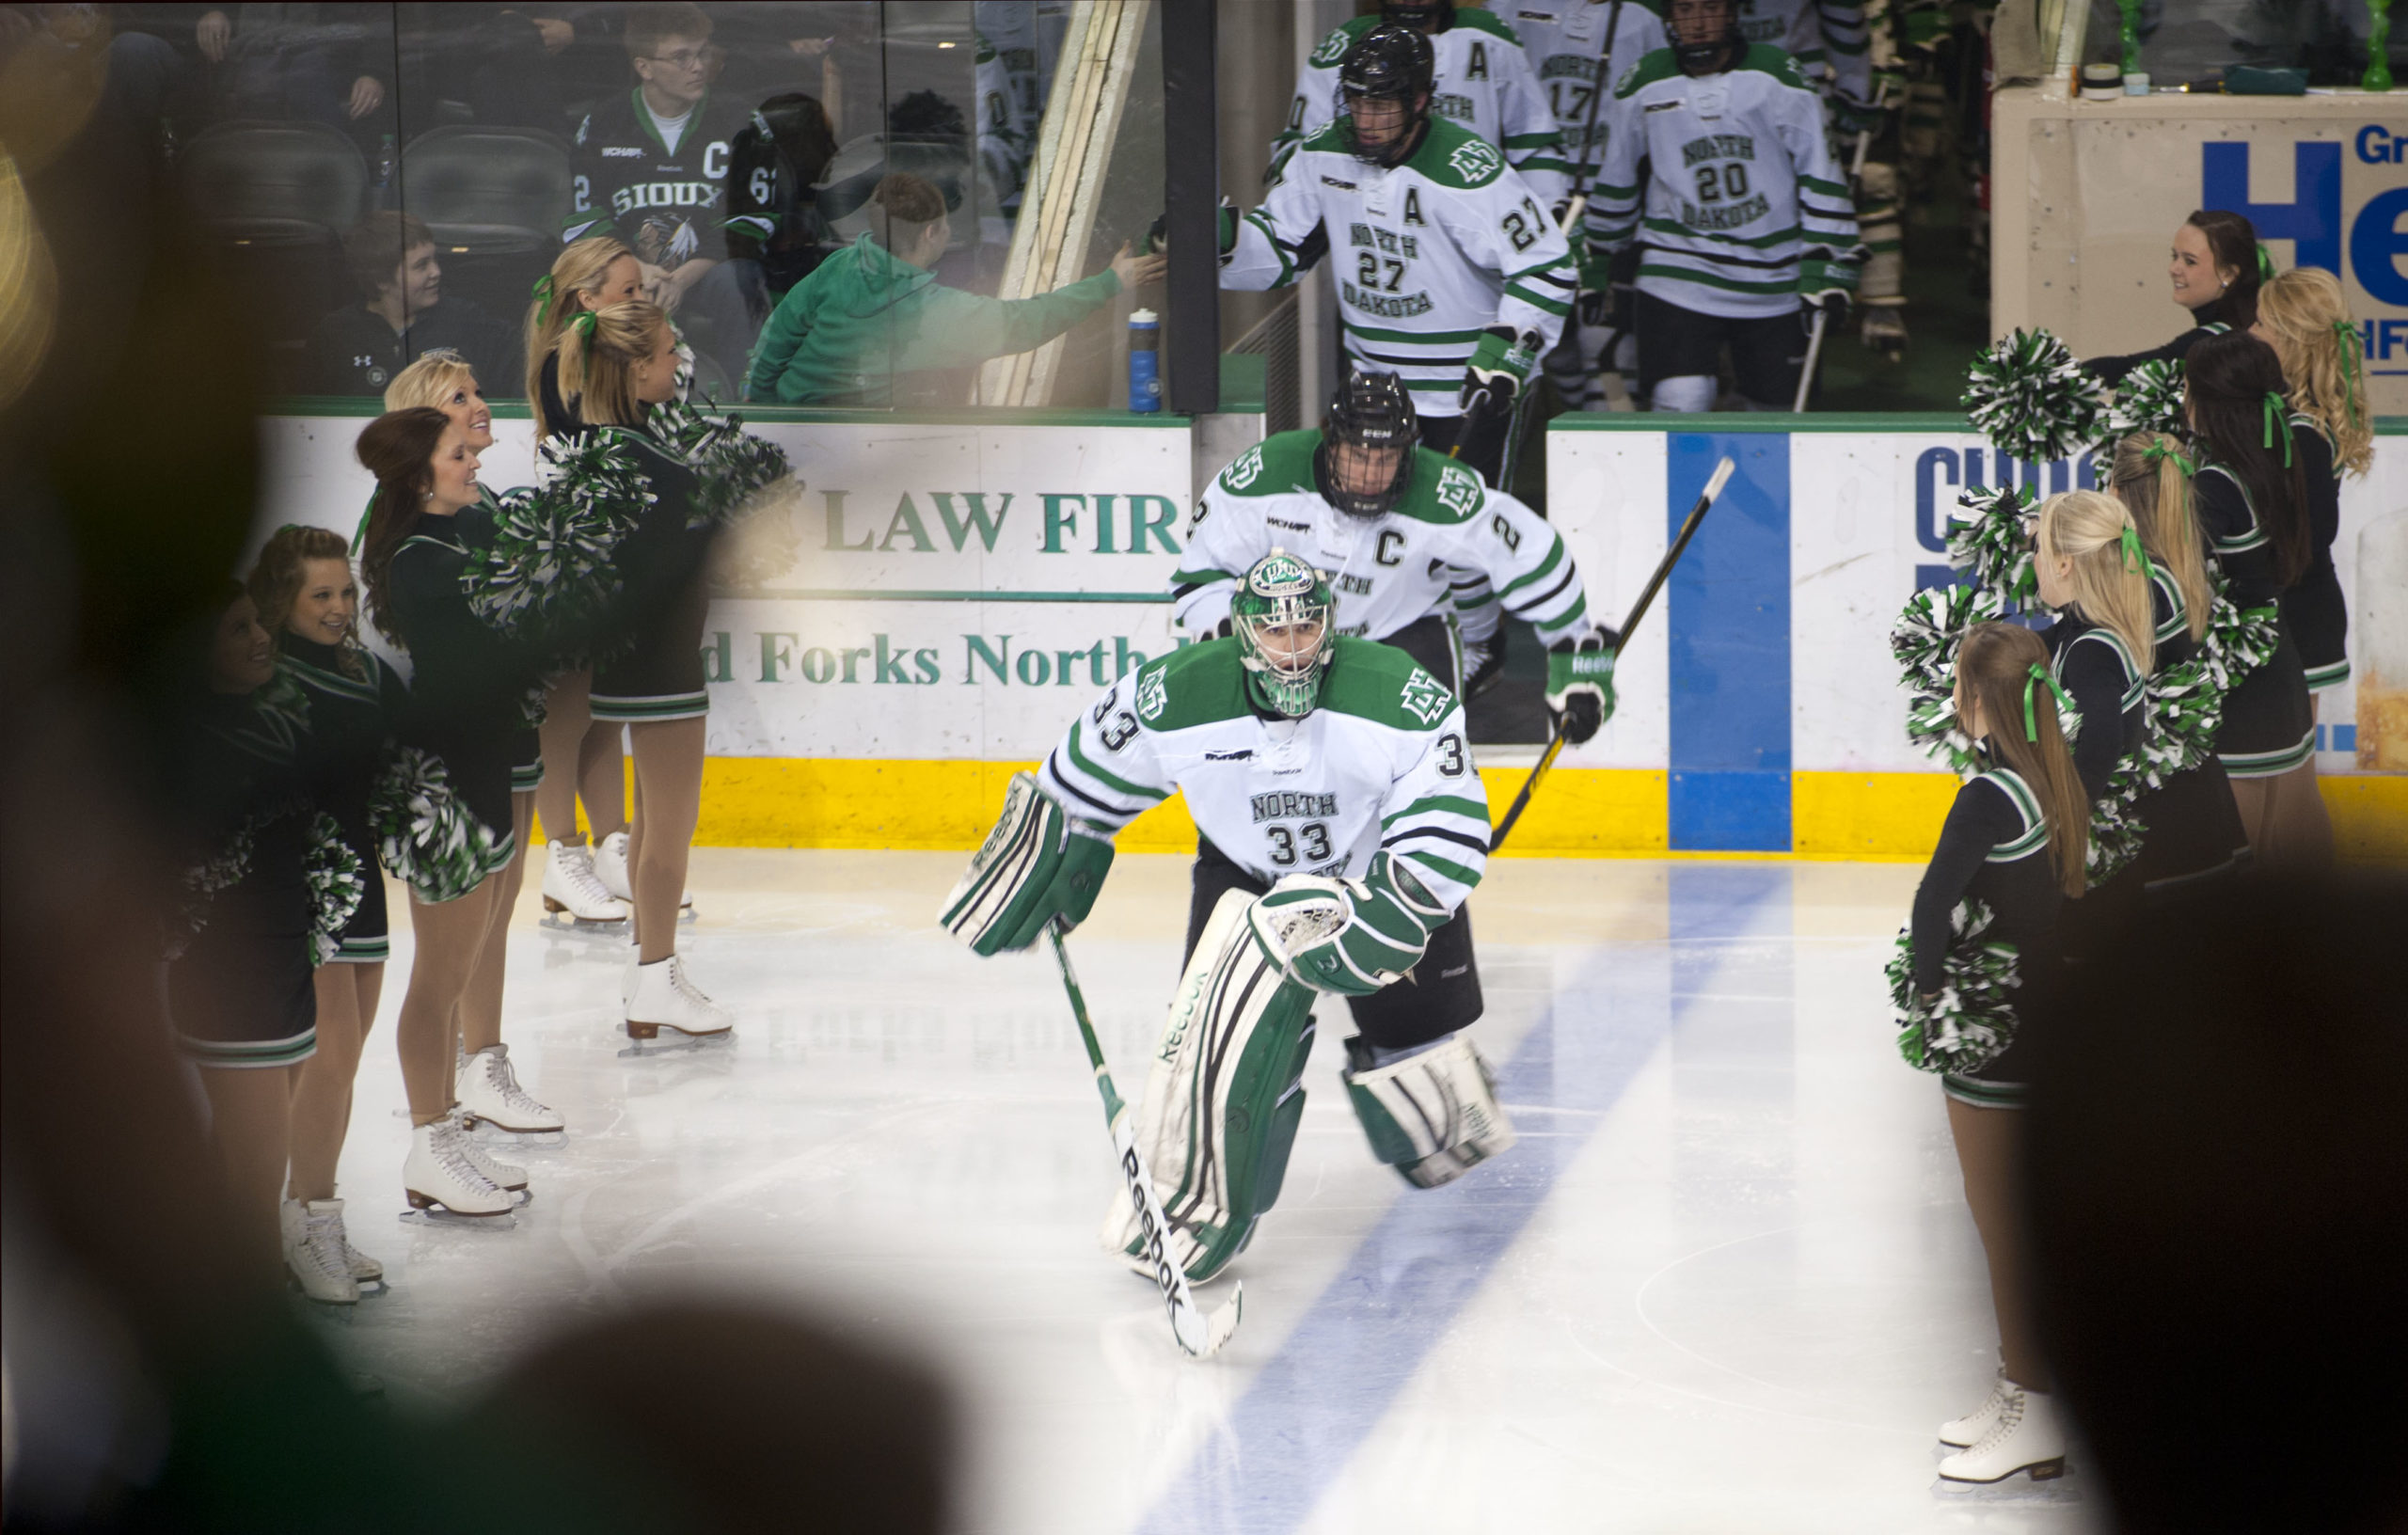 Members of the UND mens hockey team skate out onto the ice at a game in Grand Forks